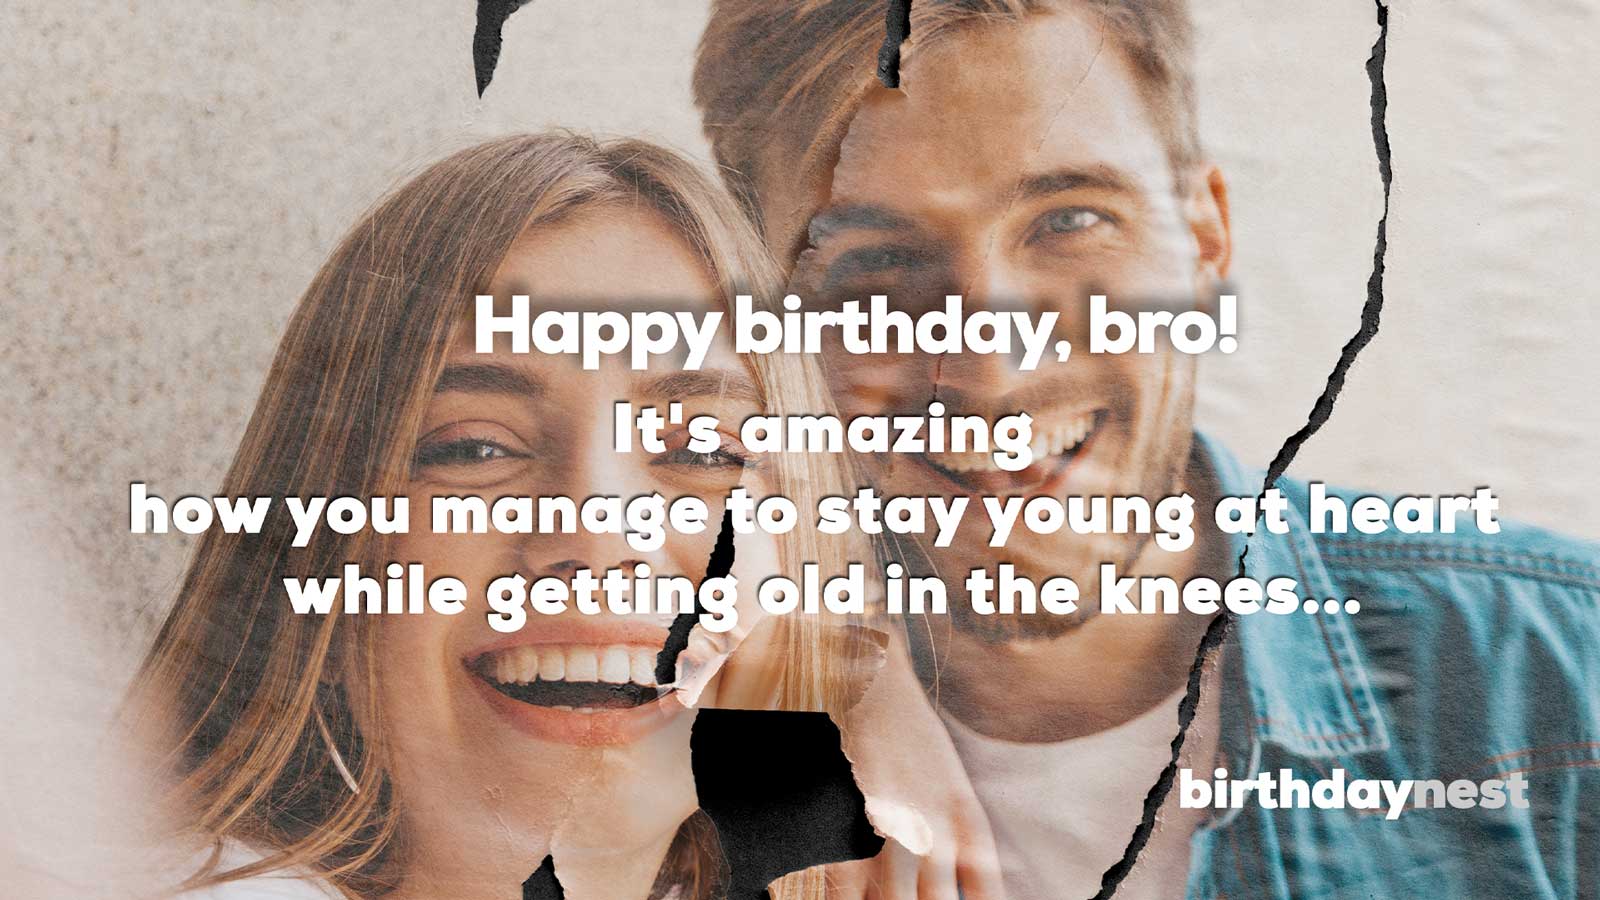 Birthday wishes from sister to brother